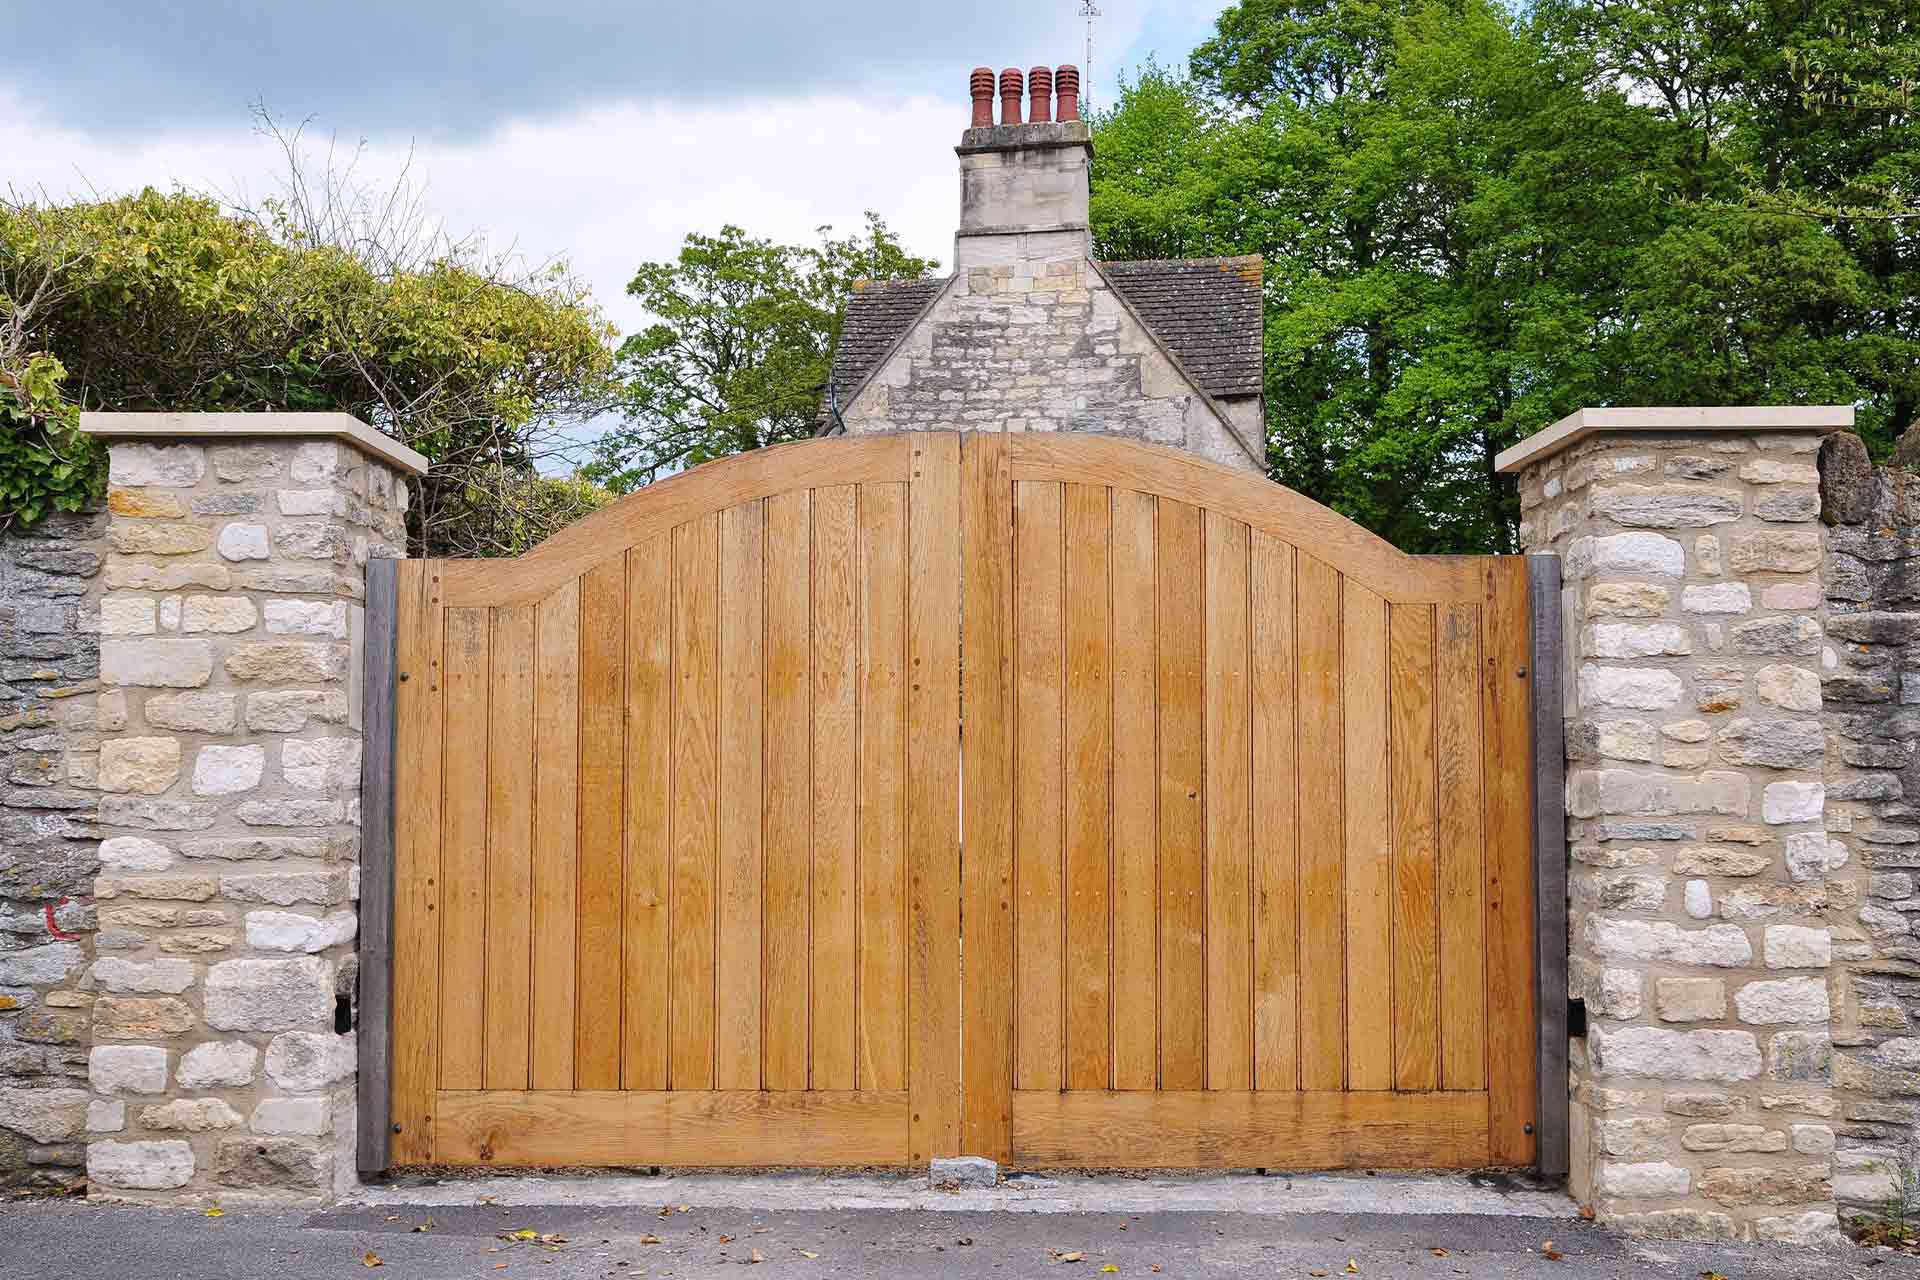 How Much Does A Driveway Gate Cost In, How Much Does A Wooden Garden Gate Cost